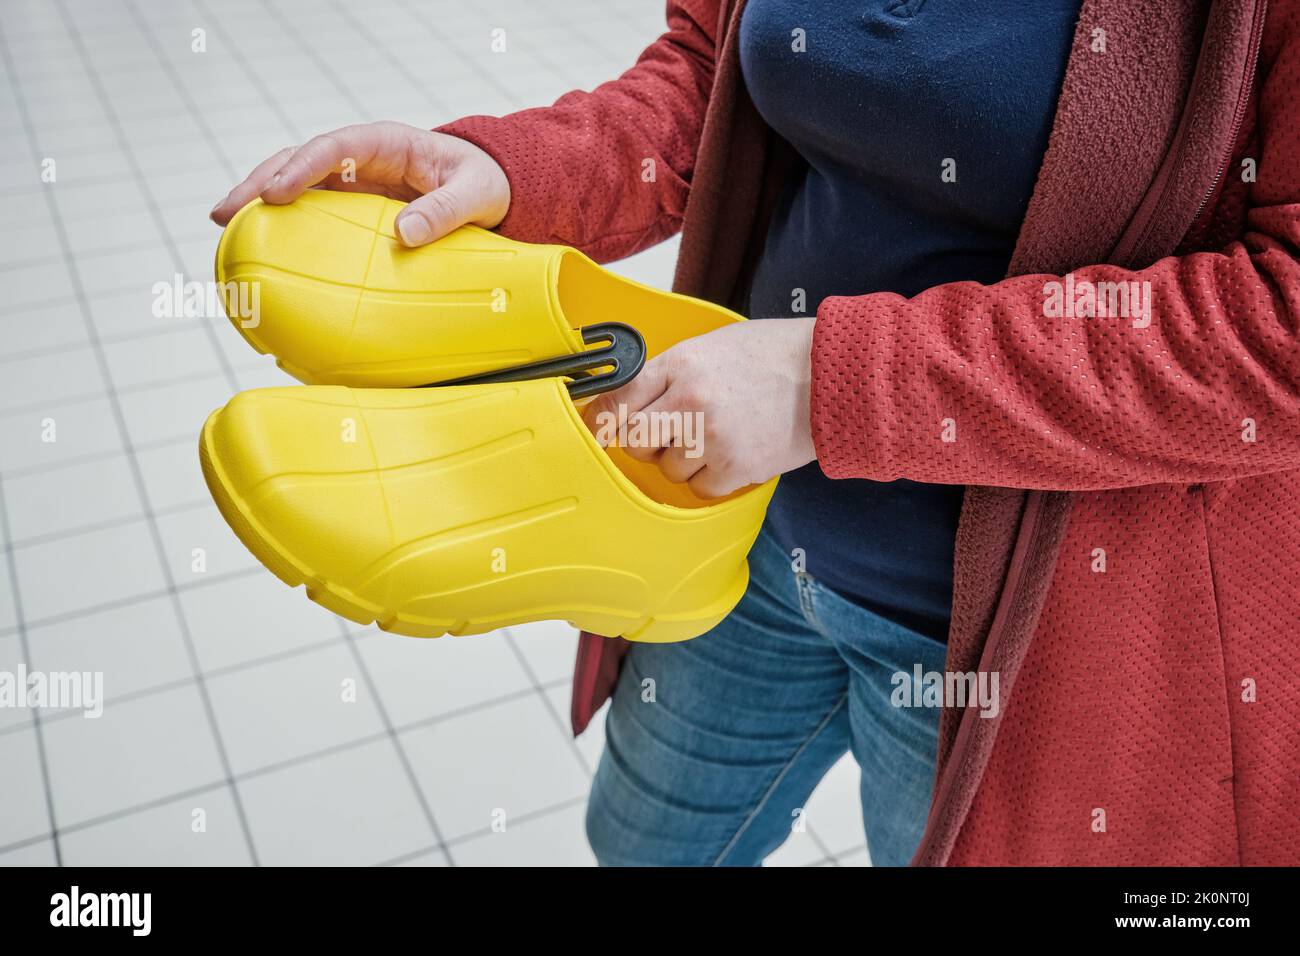 Pregnant woman in store chooses yellow rubber galoshes to buy. Hands close up Stock Photo